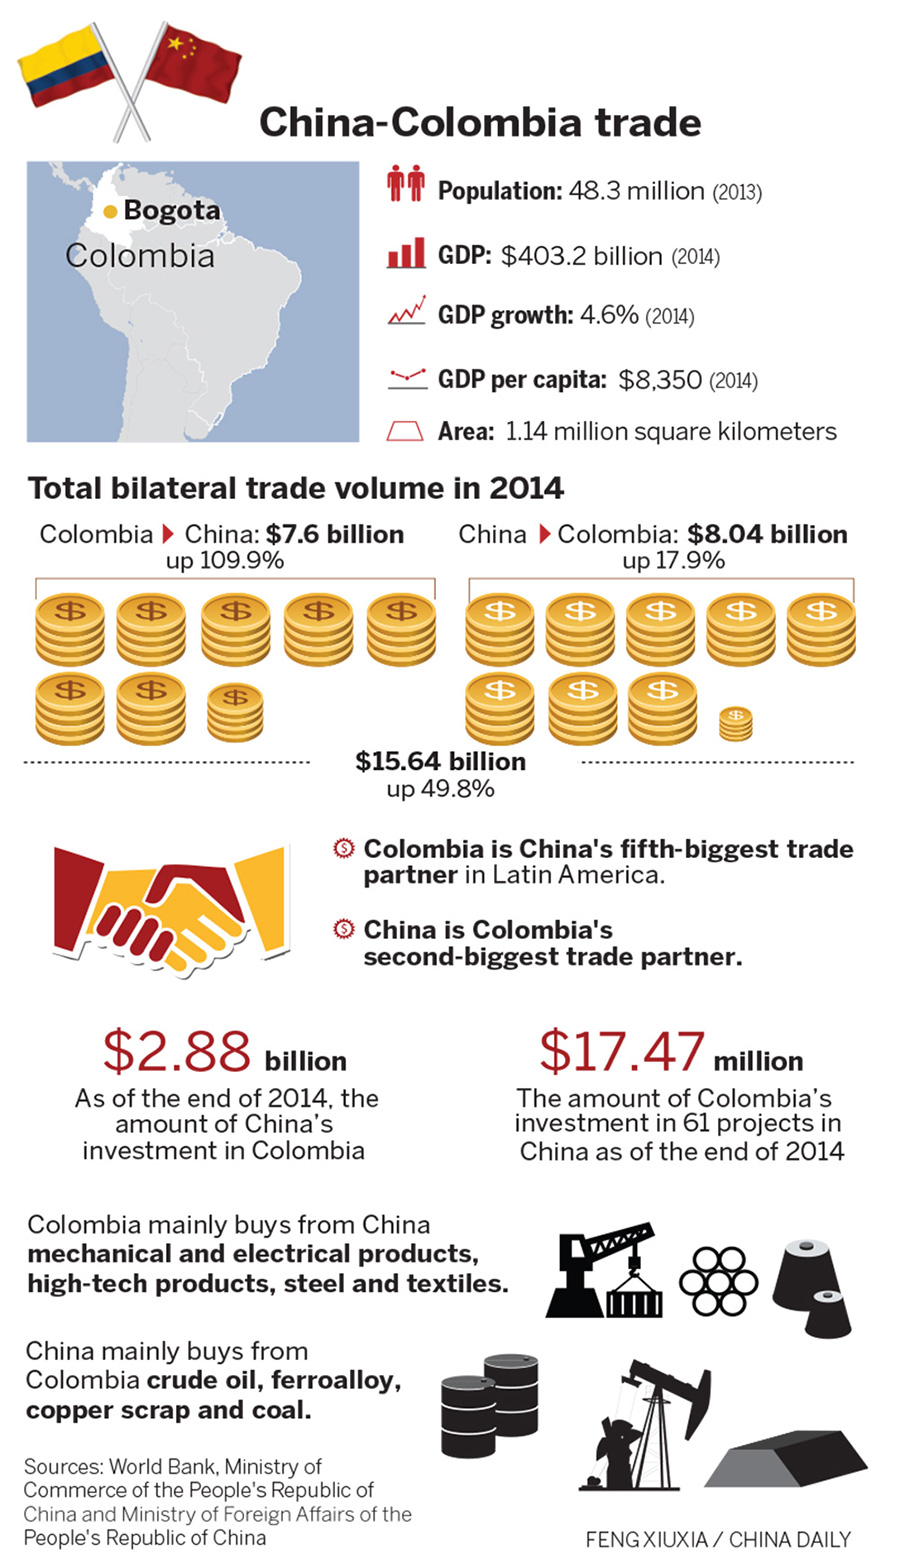 China-Colombia trade